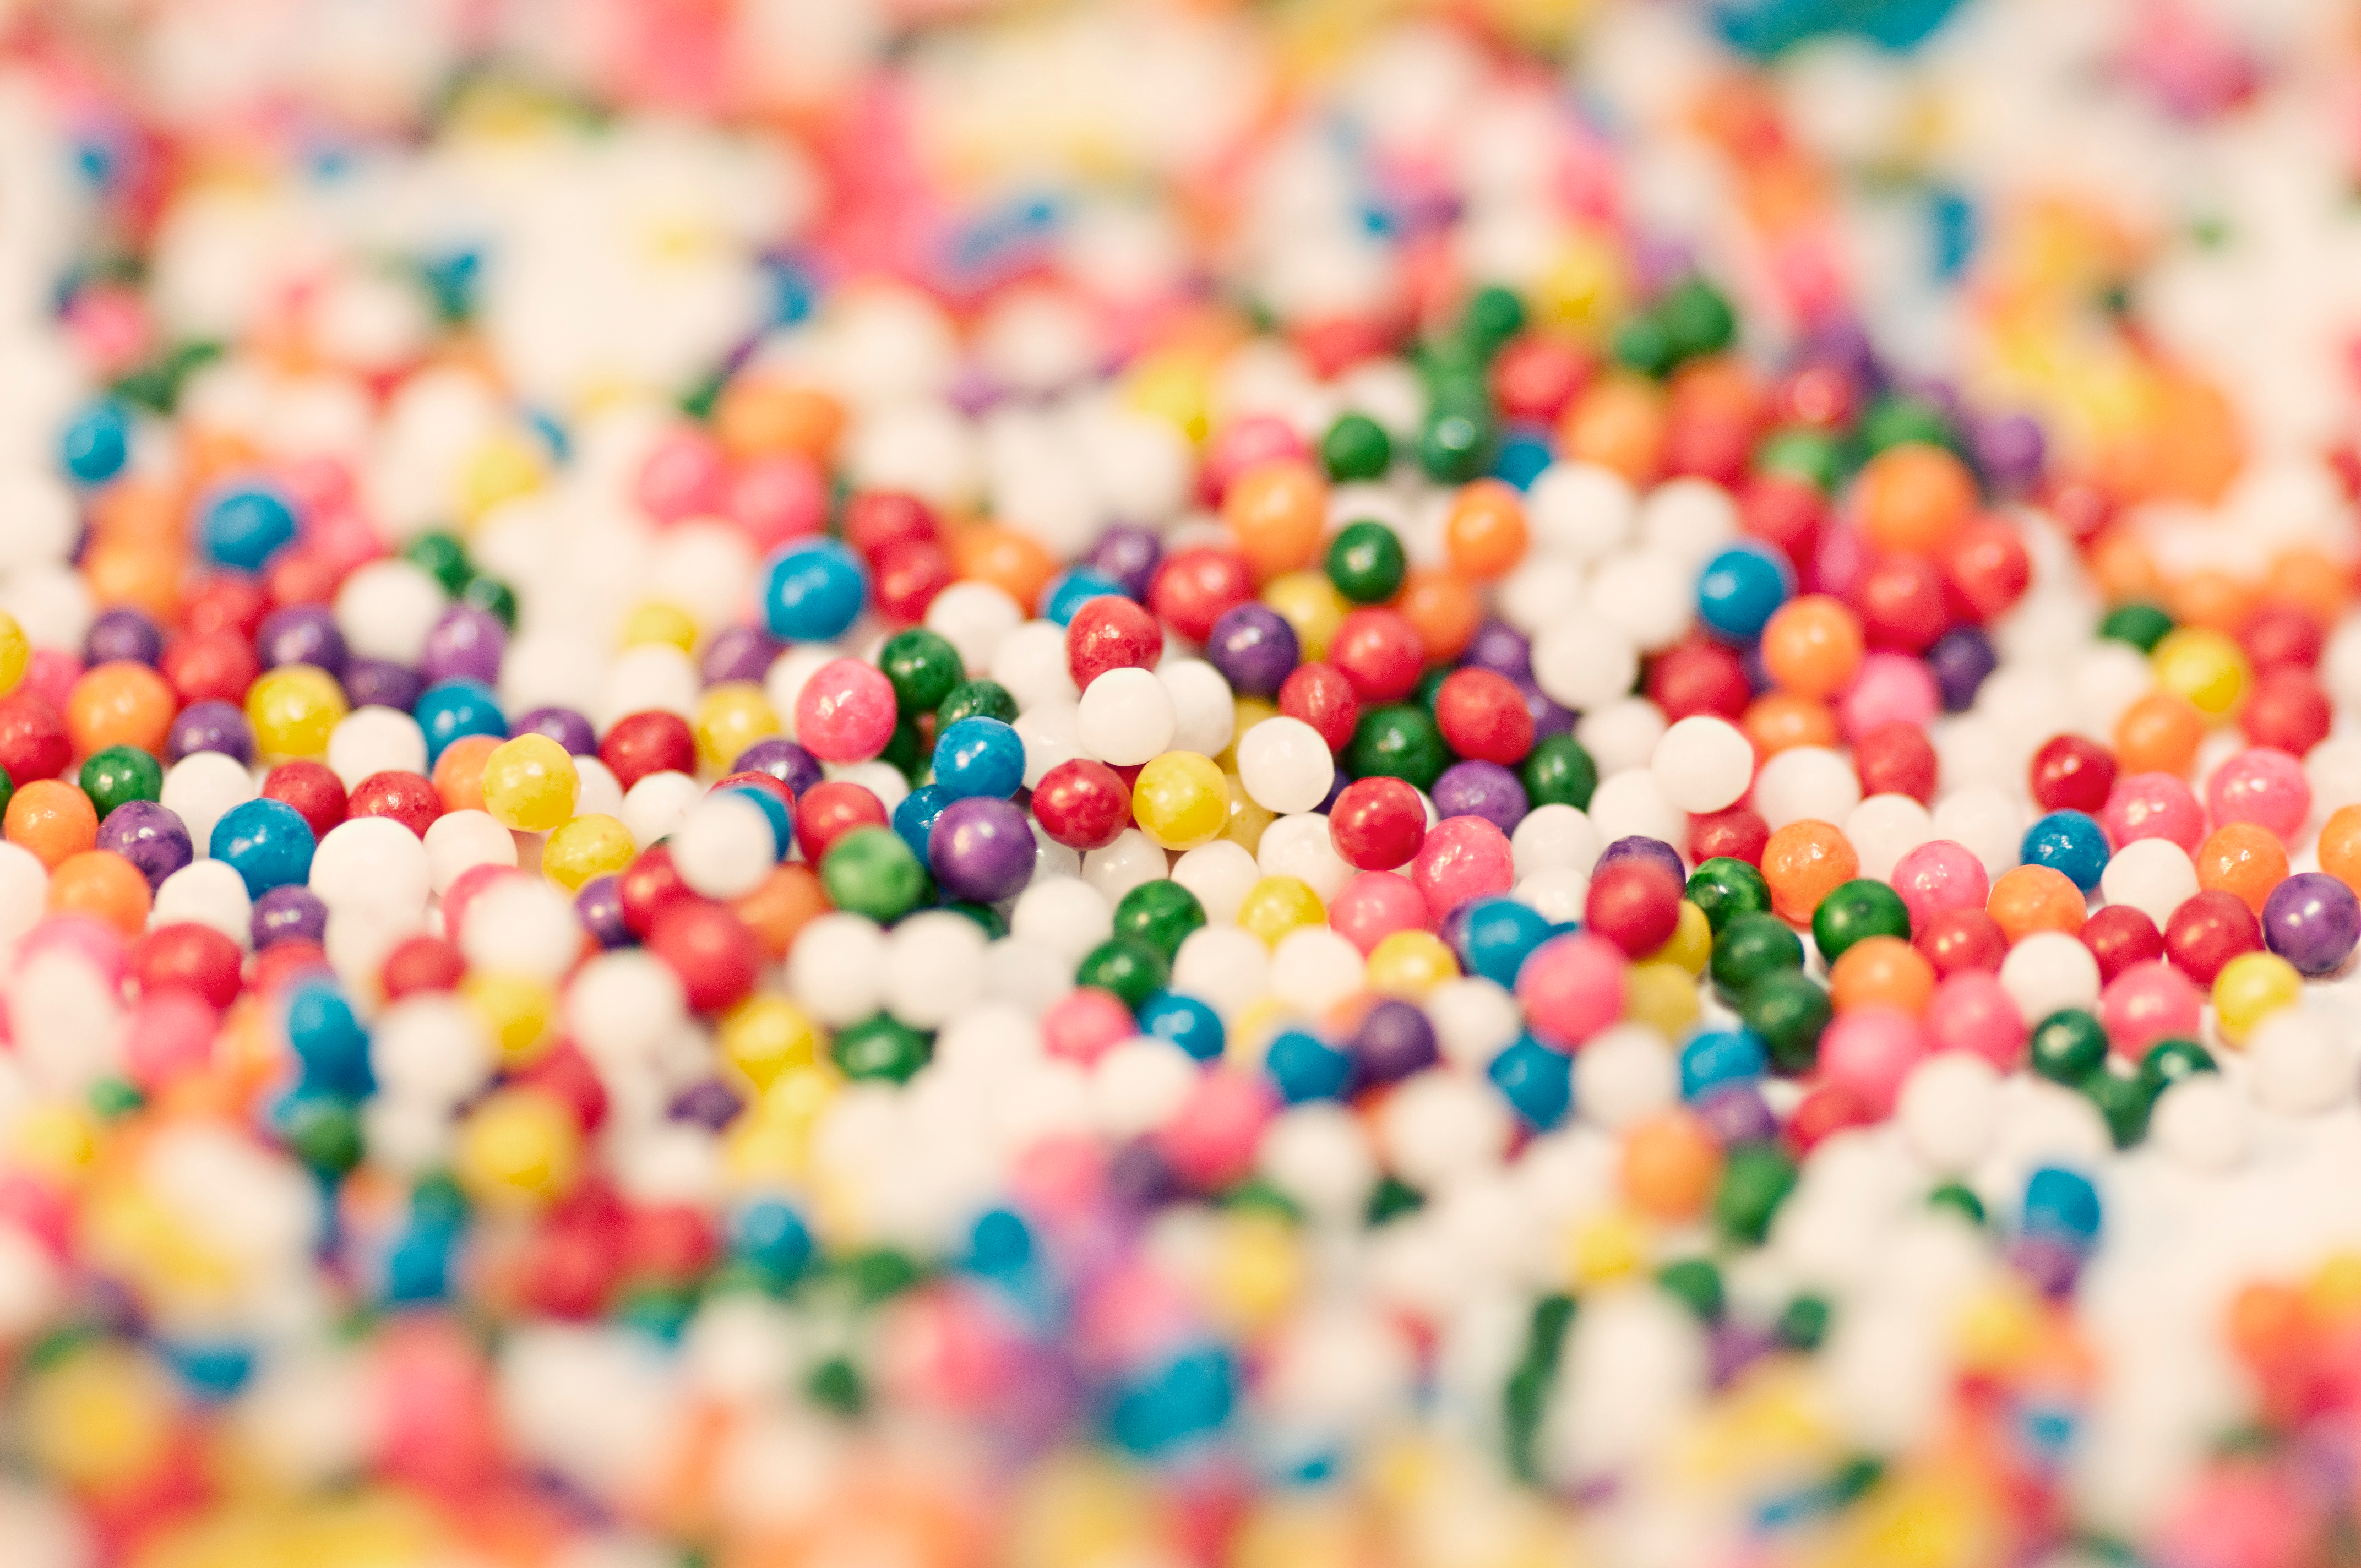 Phone Background Full HD multicolored, motley, food, candies